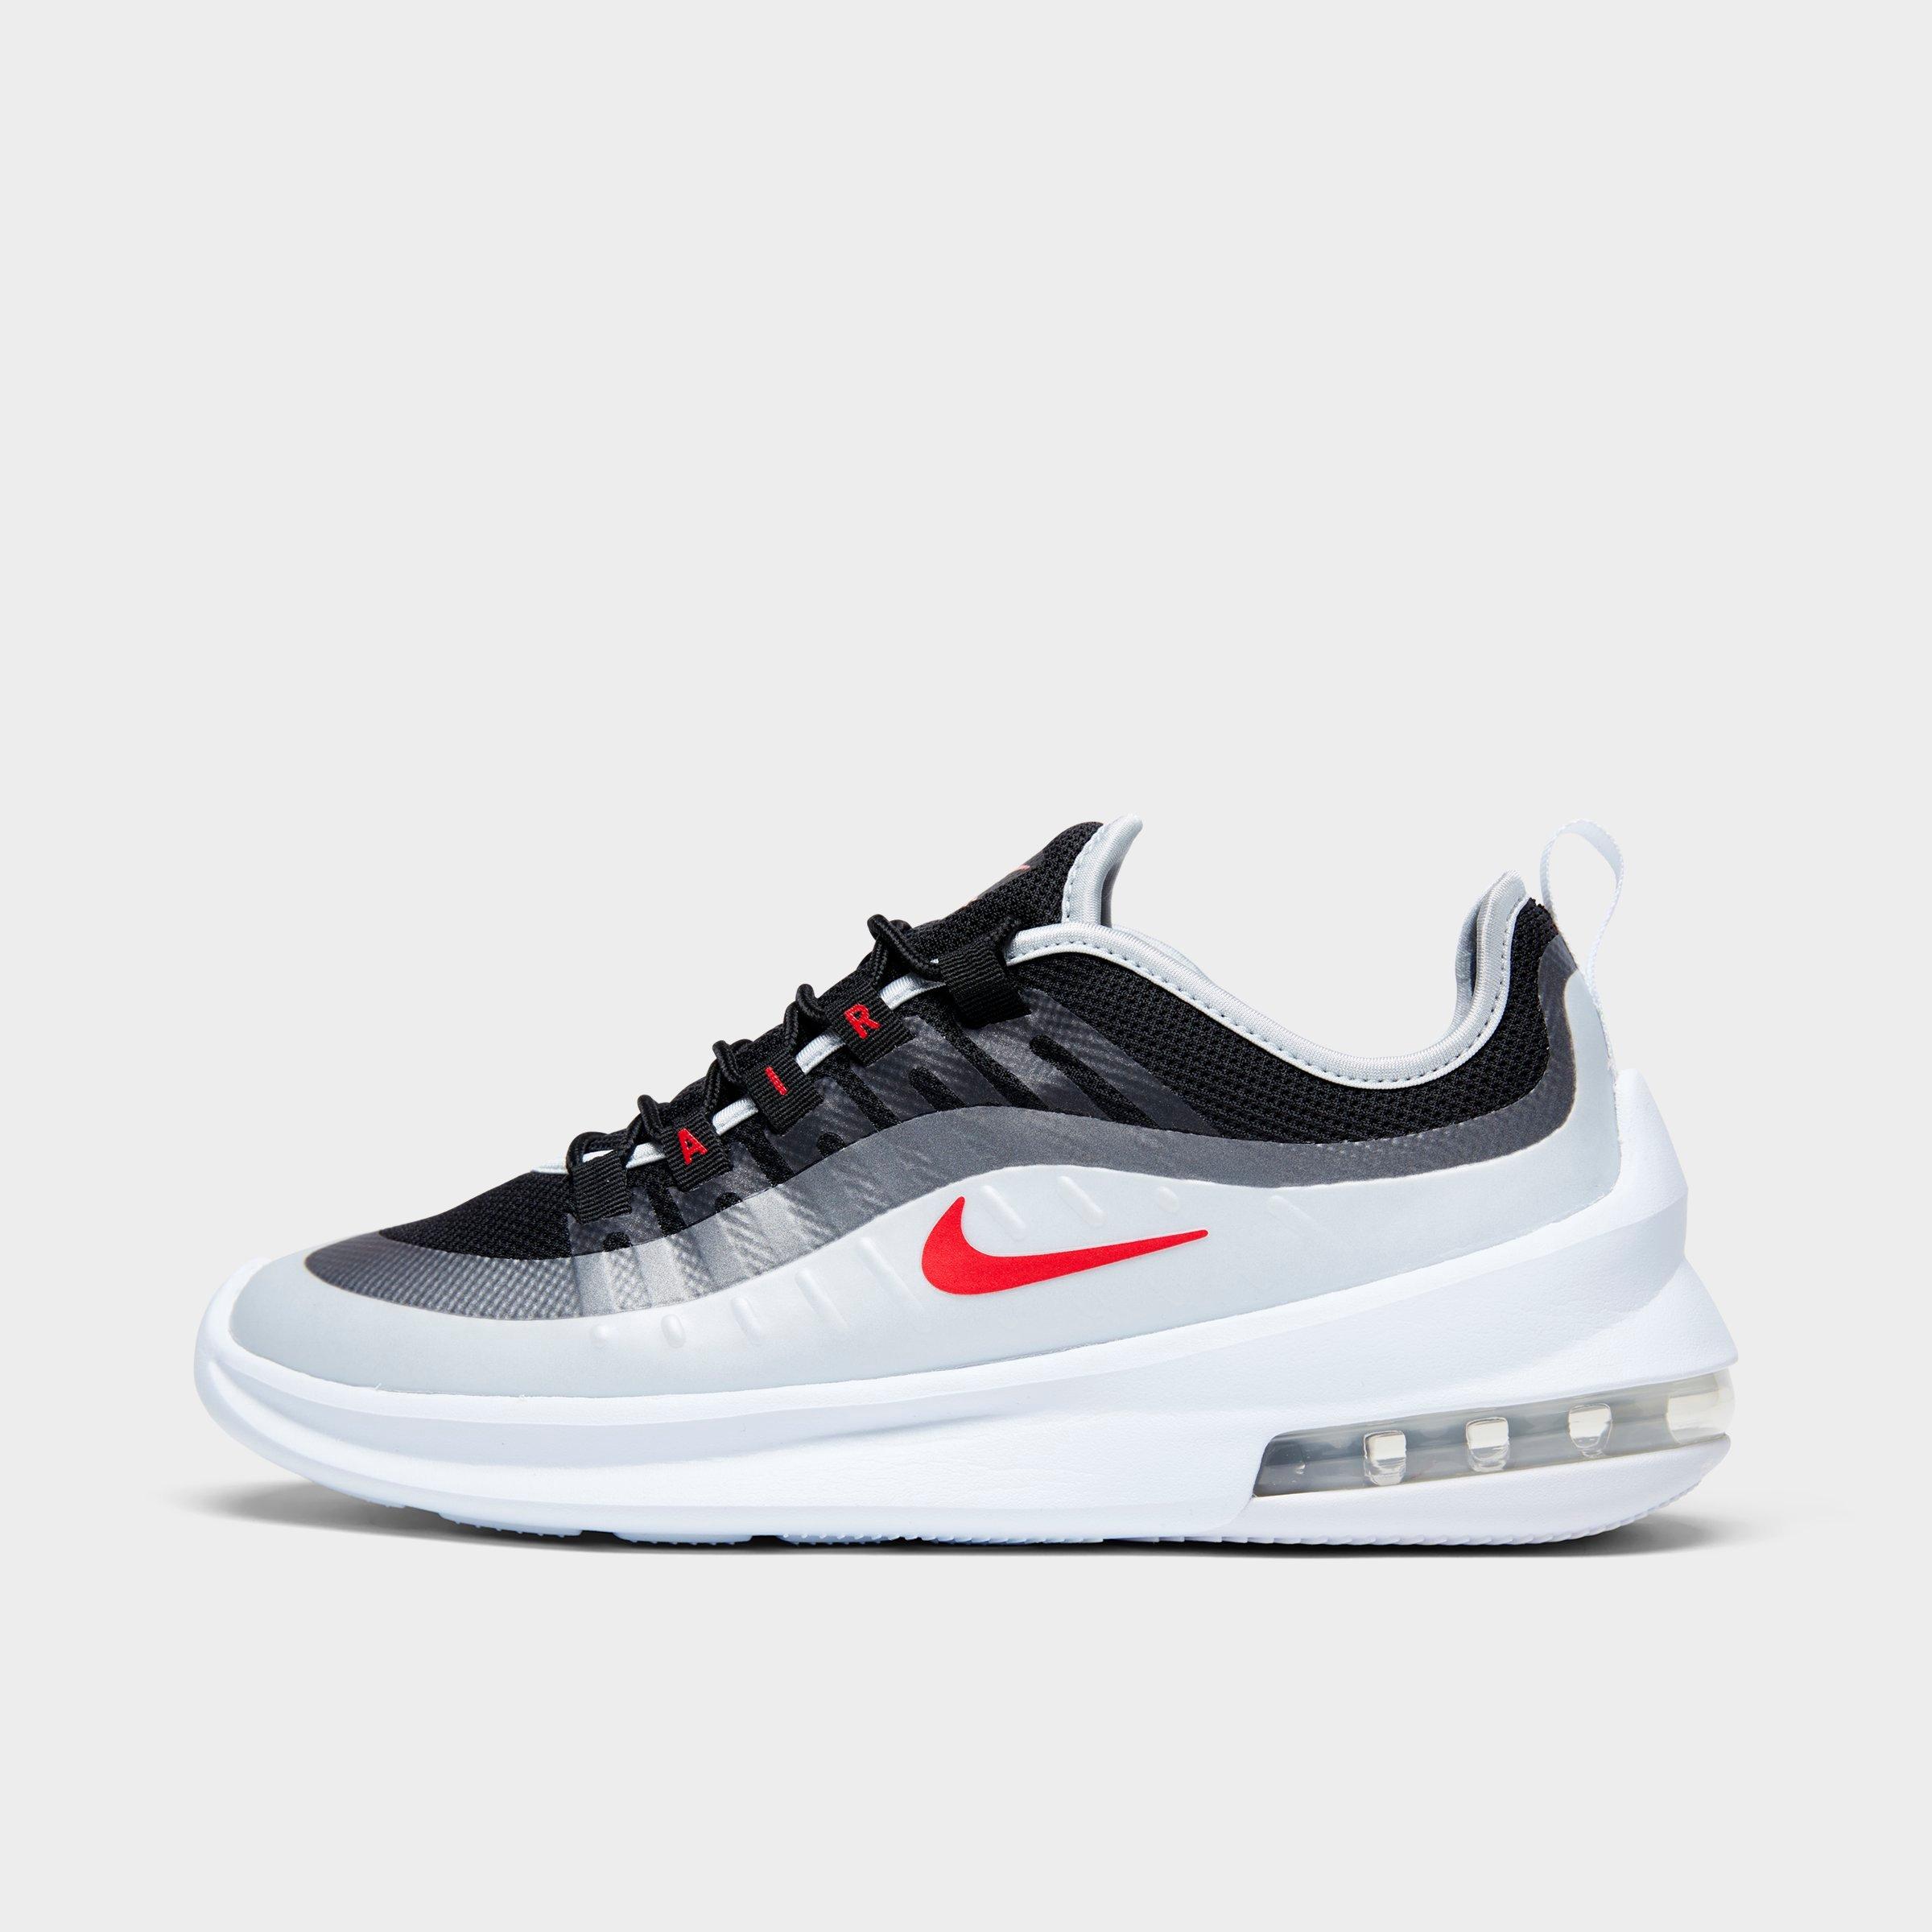 Men's Nike Air Max Axis Casual Shoes 